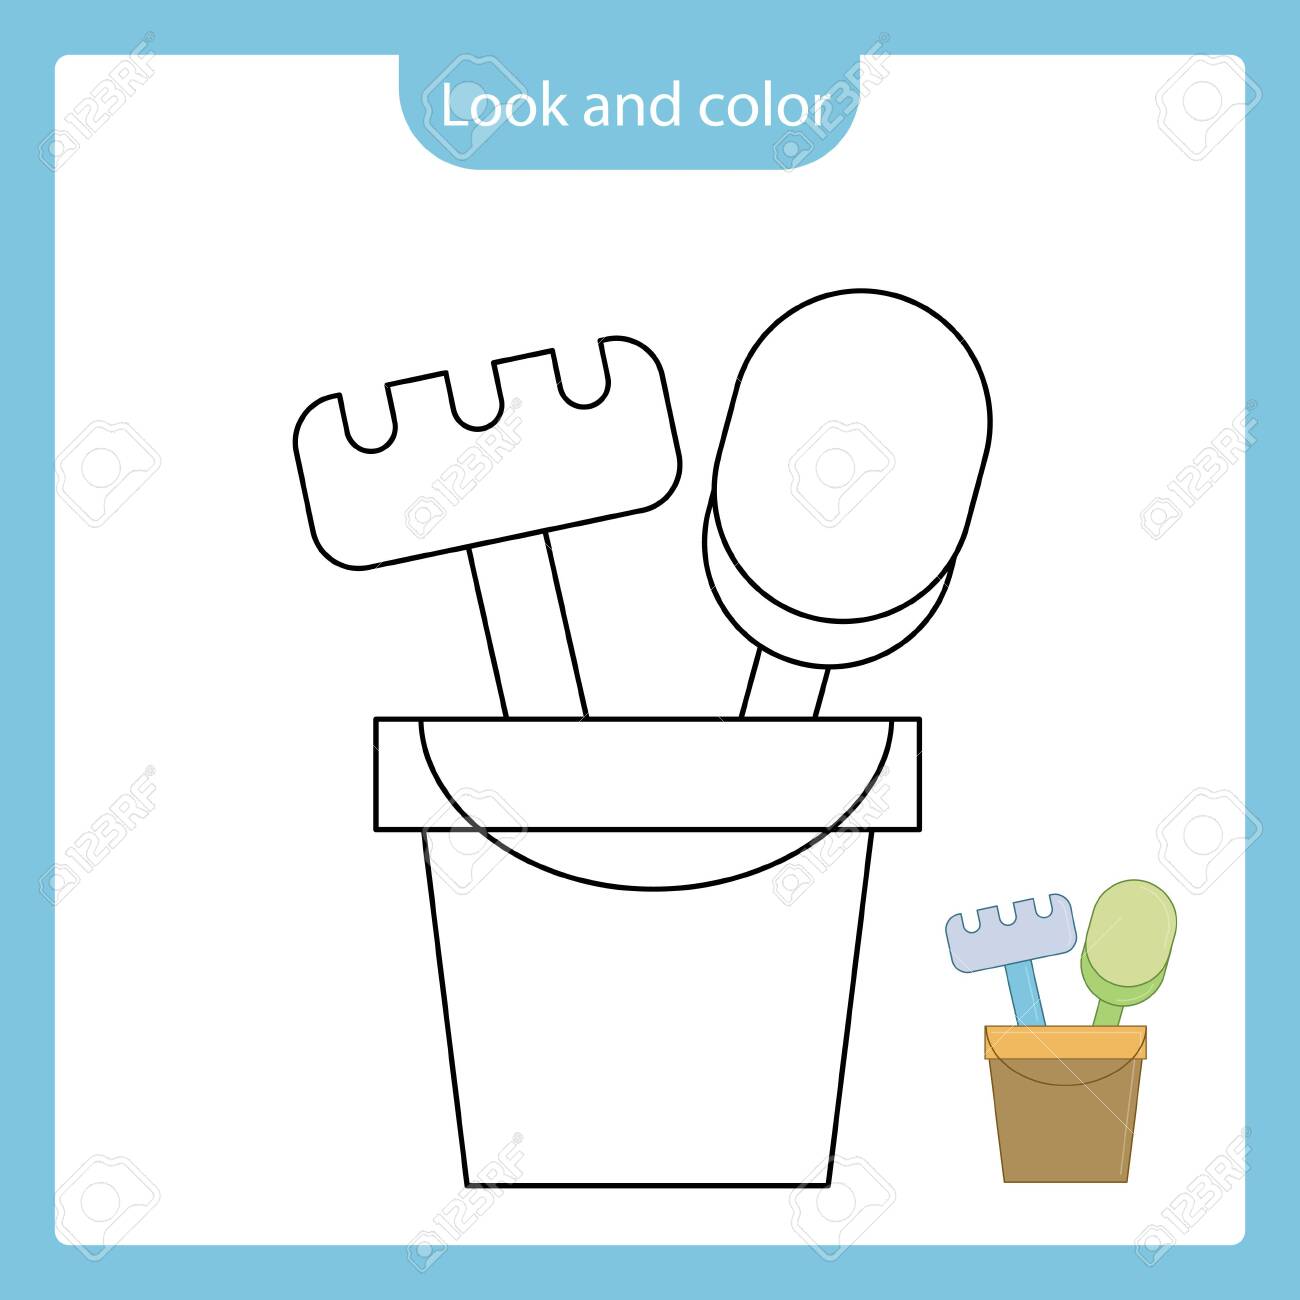 Look and color coloring page outline of shovel and rake in a bucket toy with example simple shapes vector illustration coloring book for kids royalty free svg cliparts vectors and stock illustration